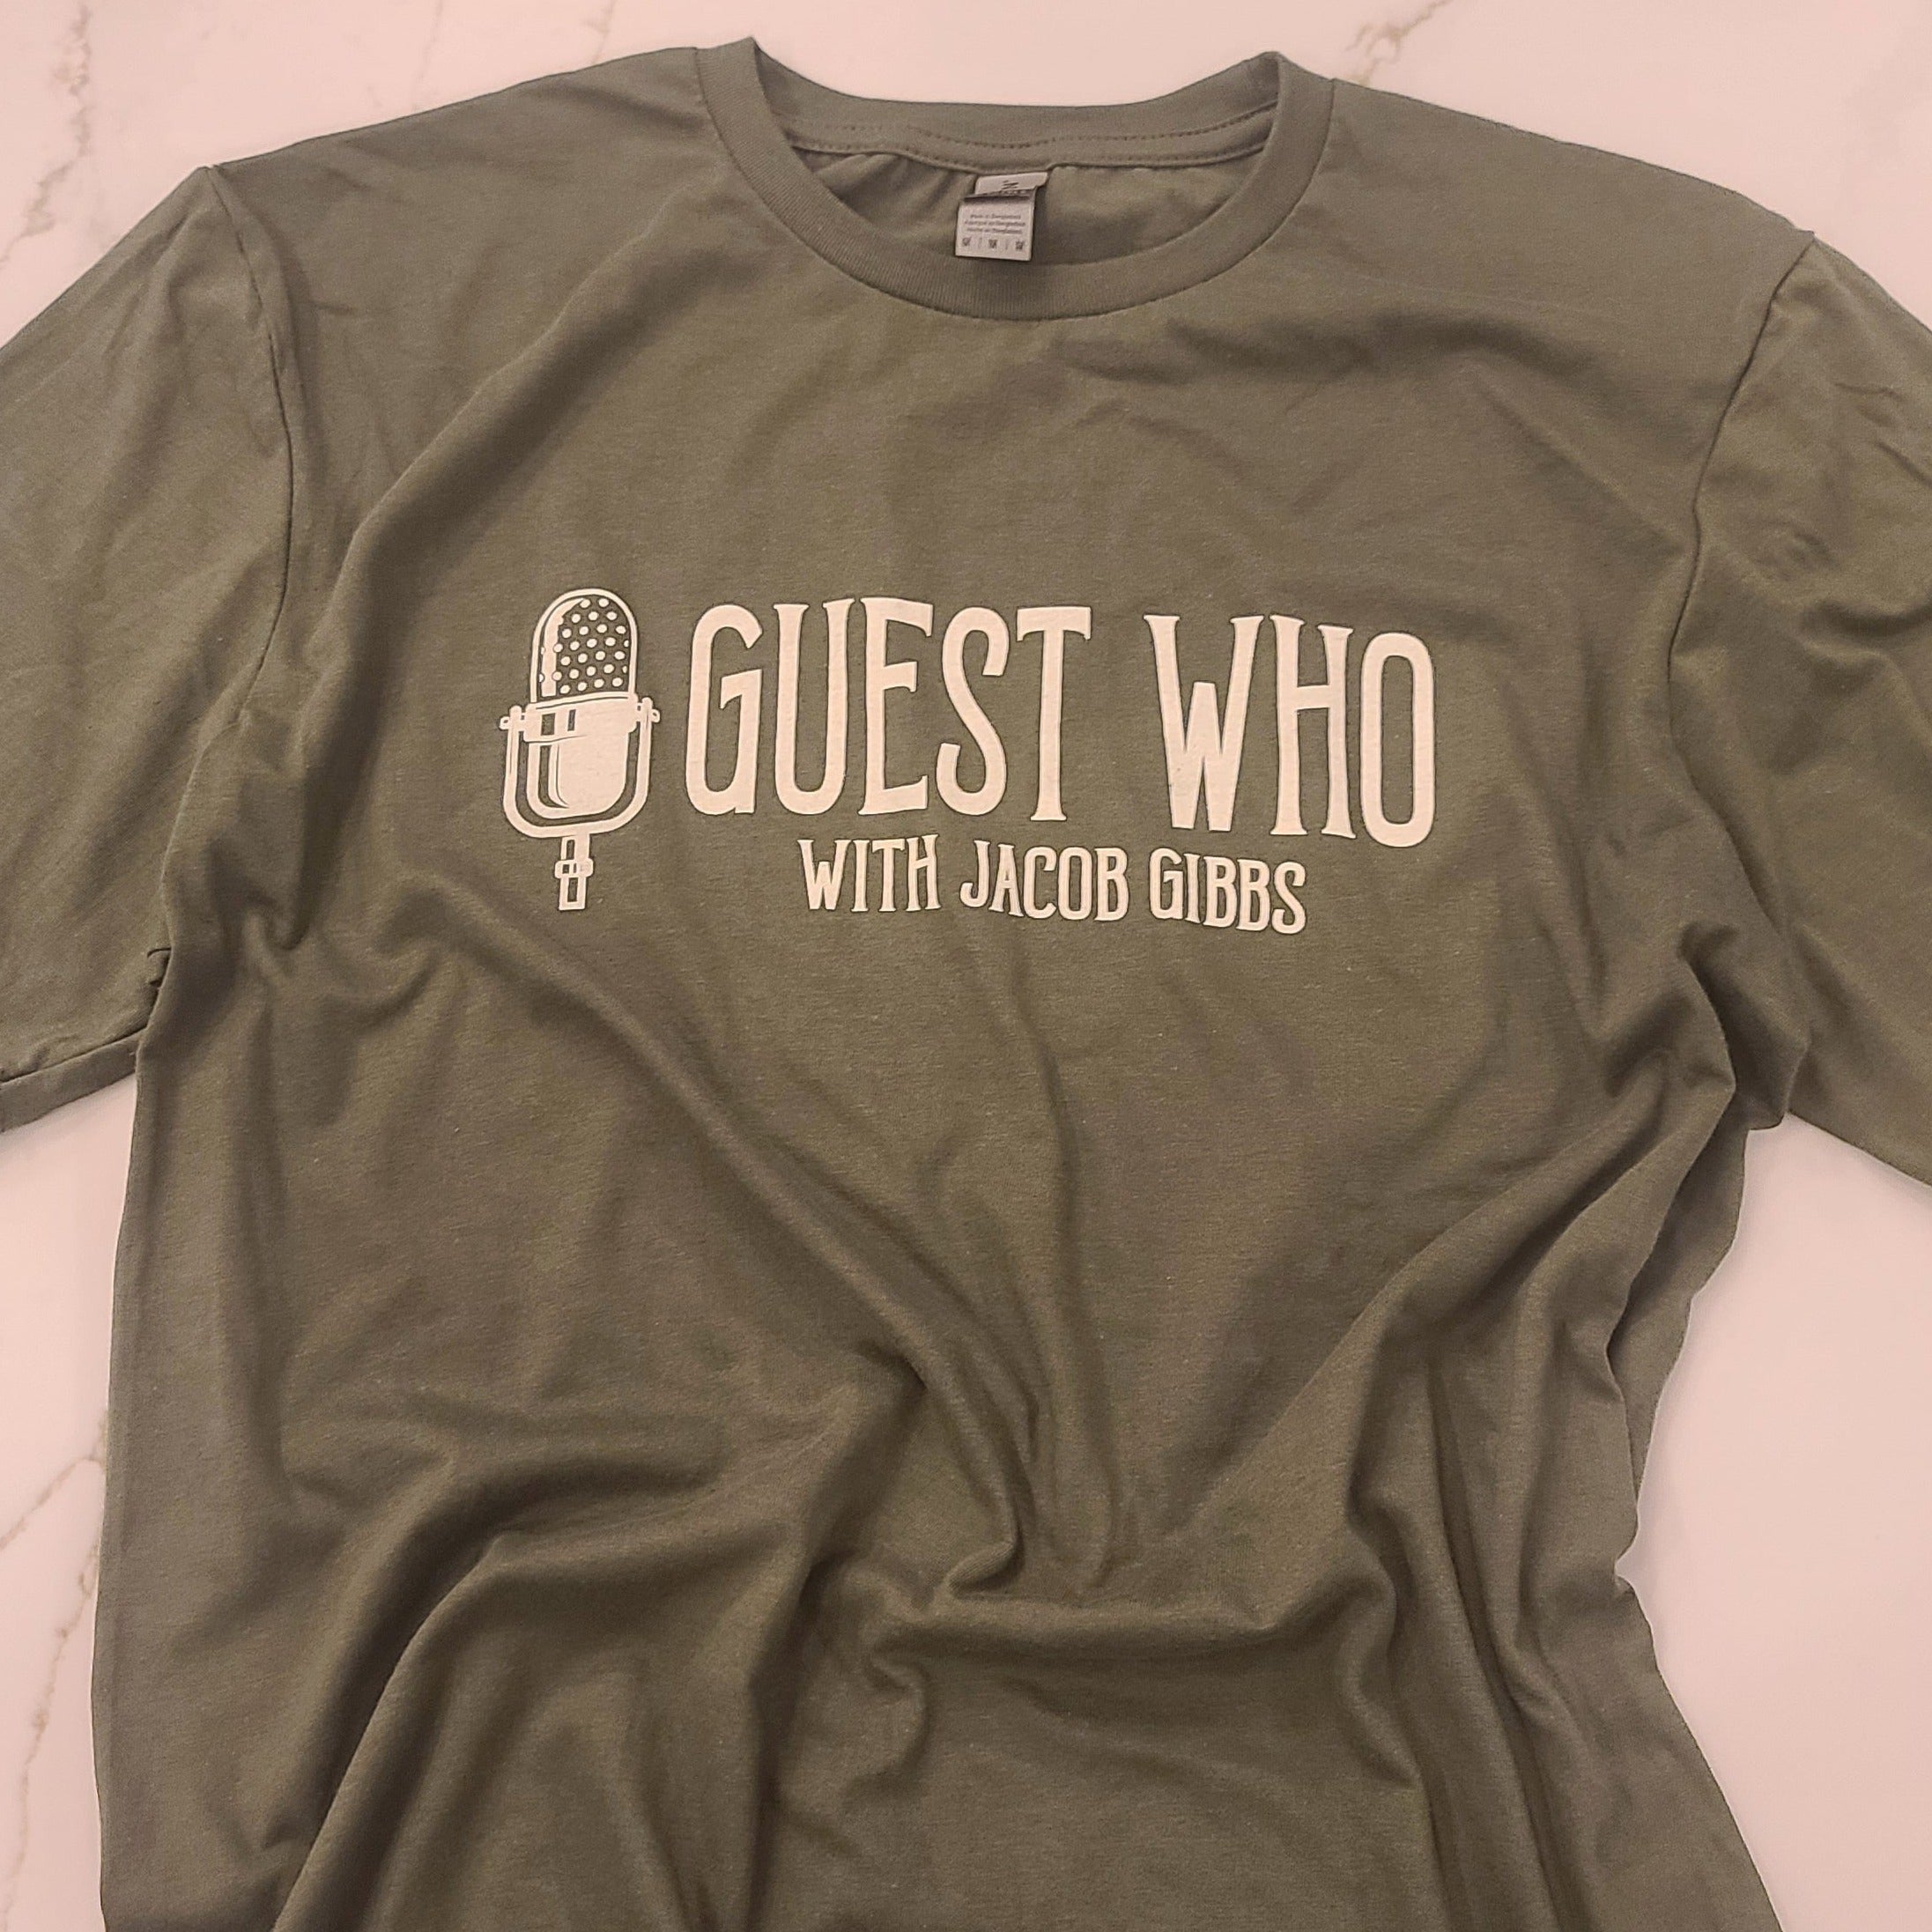 GUEST WHO T-SHIRT